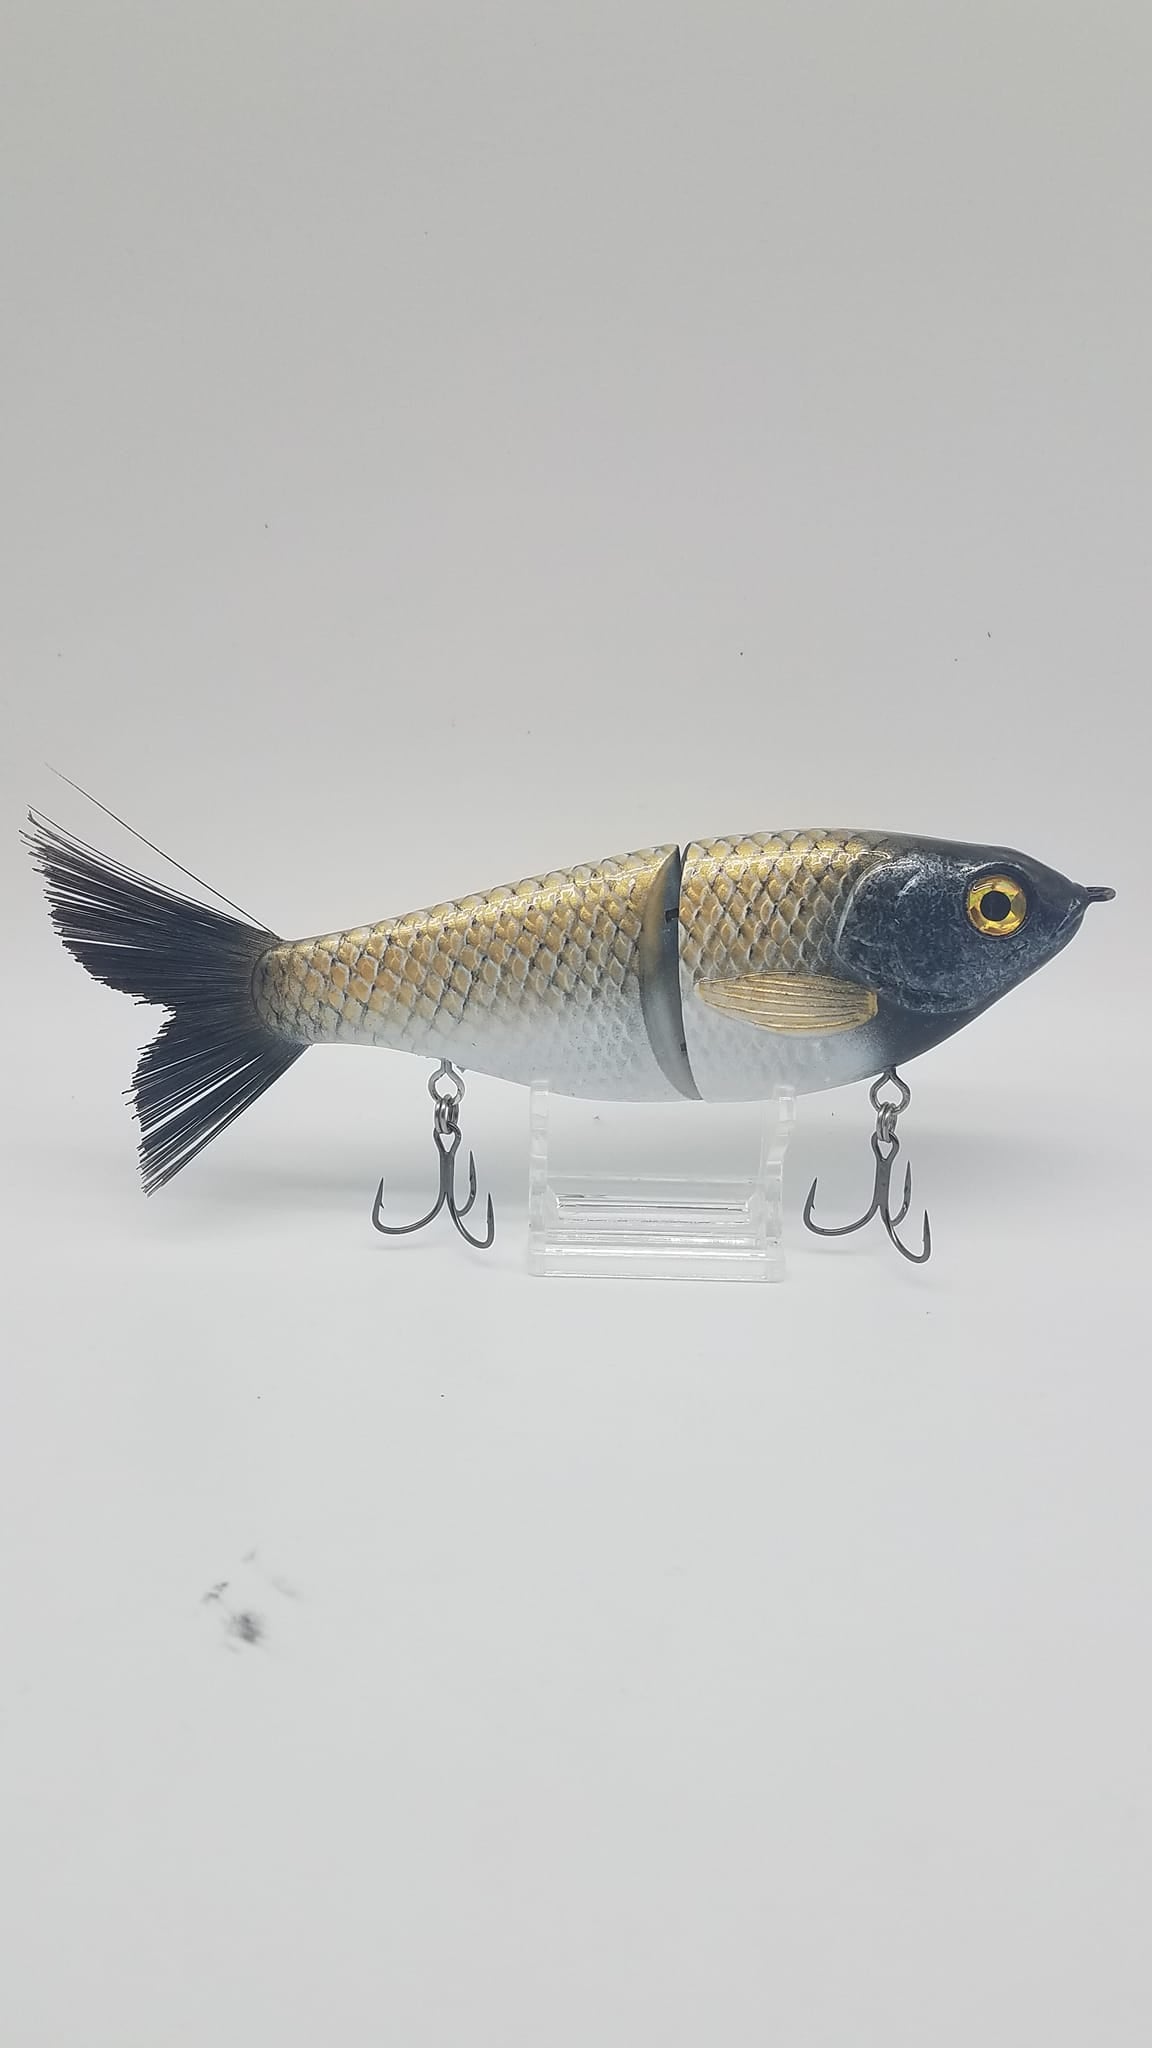 7" 2.5 Oz Glide Moderate Sinking With Rattles